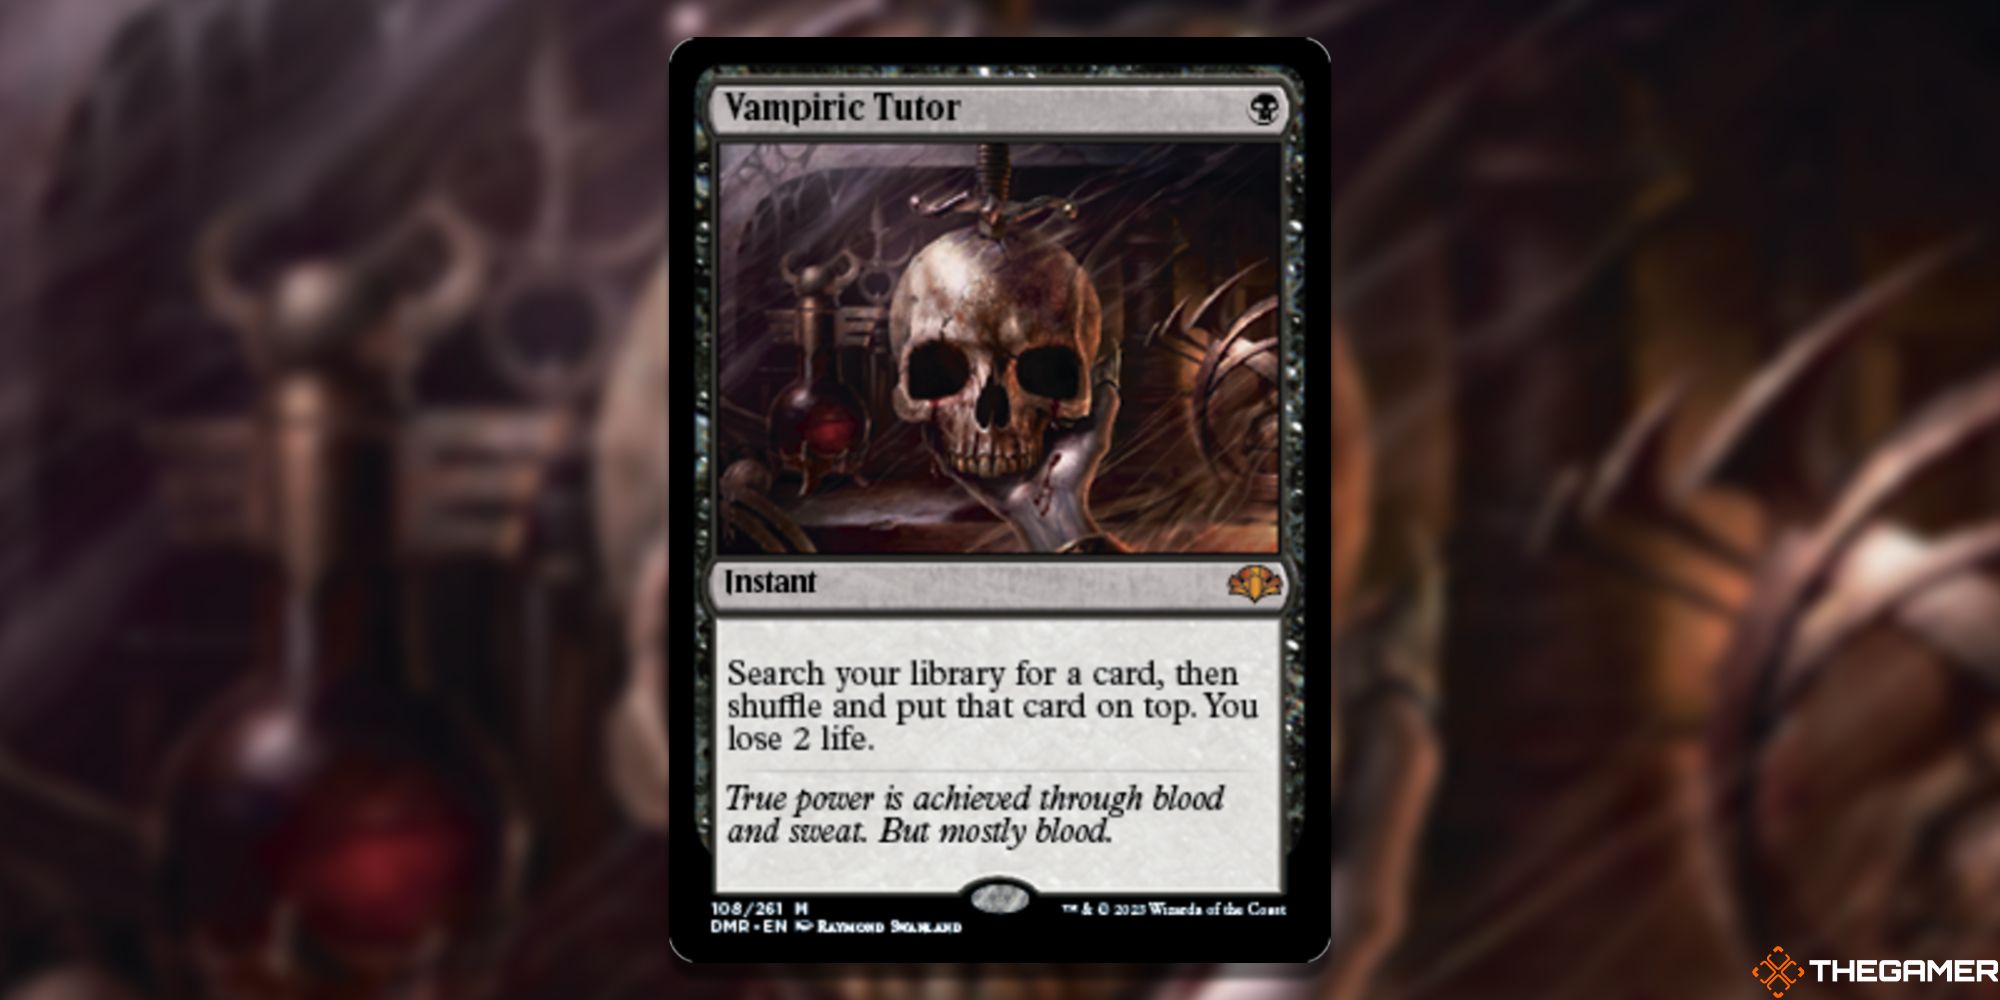 Image of the Vampiric Tutor card in Magic: The Gathering, with art by Raymond Swanland